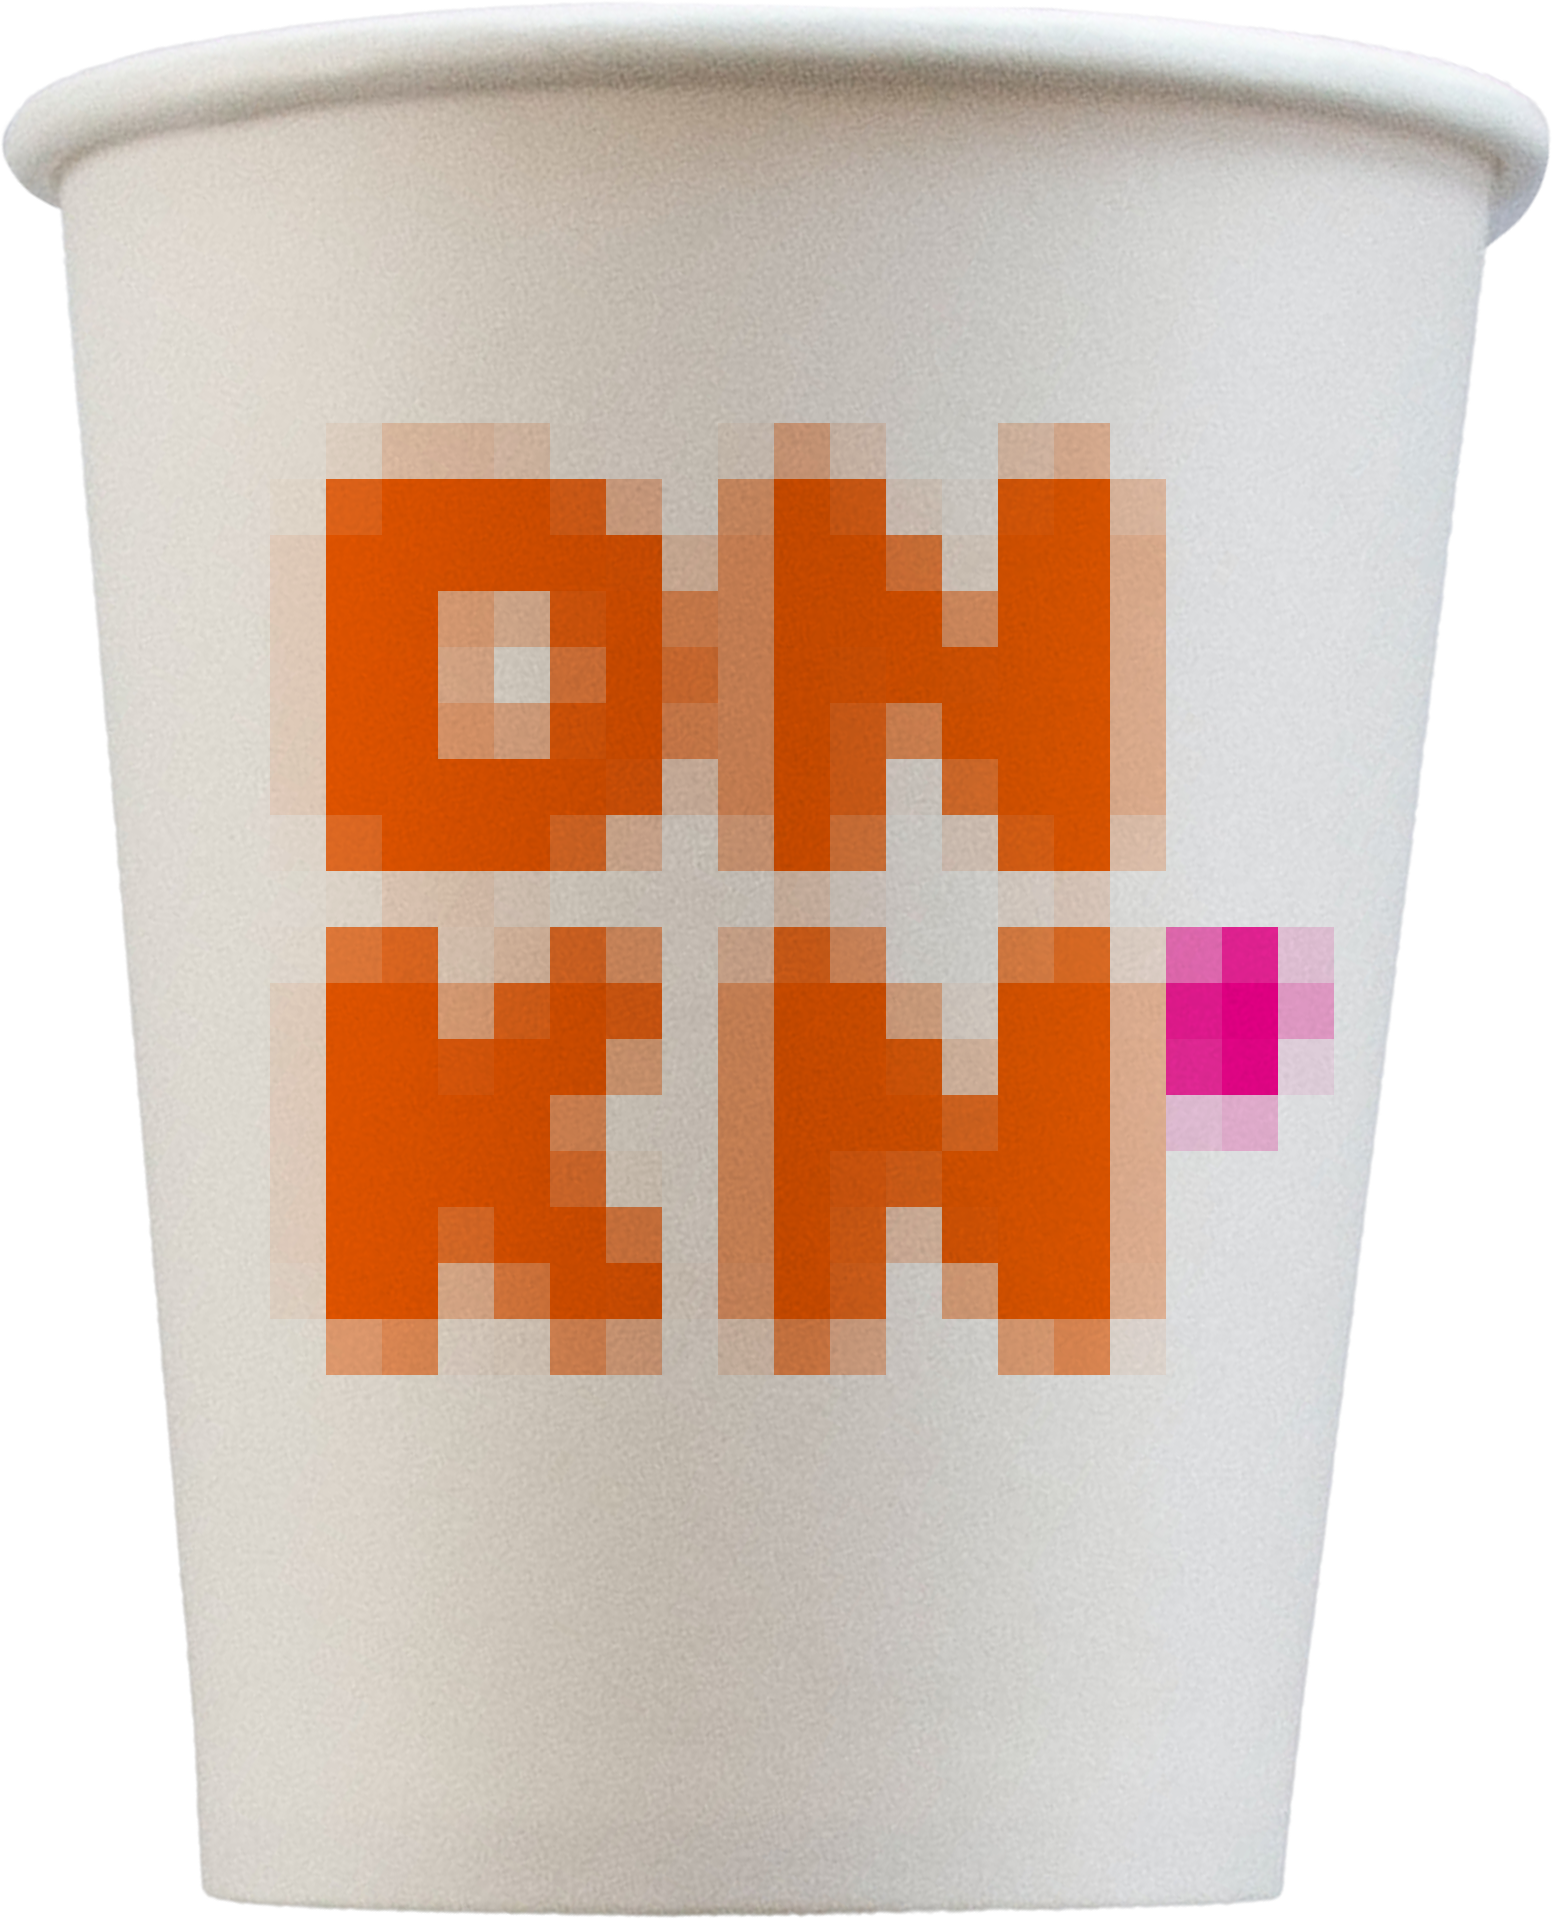 A blurred image of a Dunkin' Donuts cup